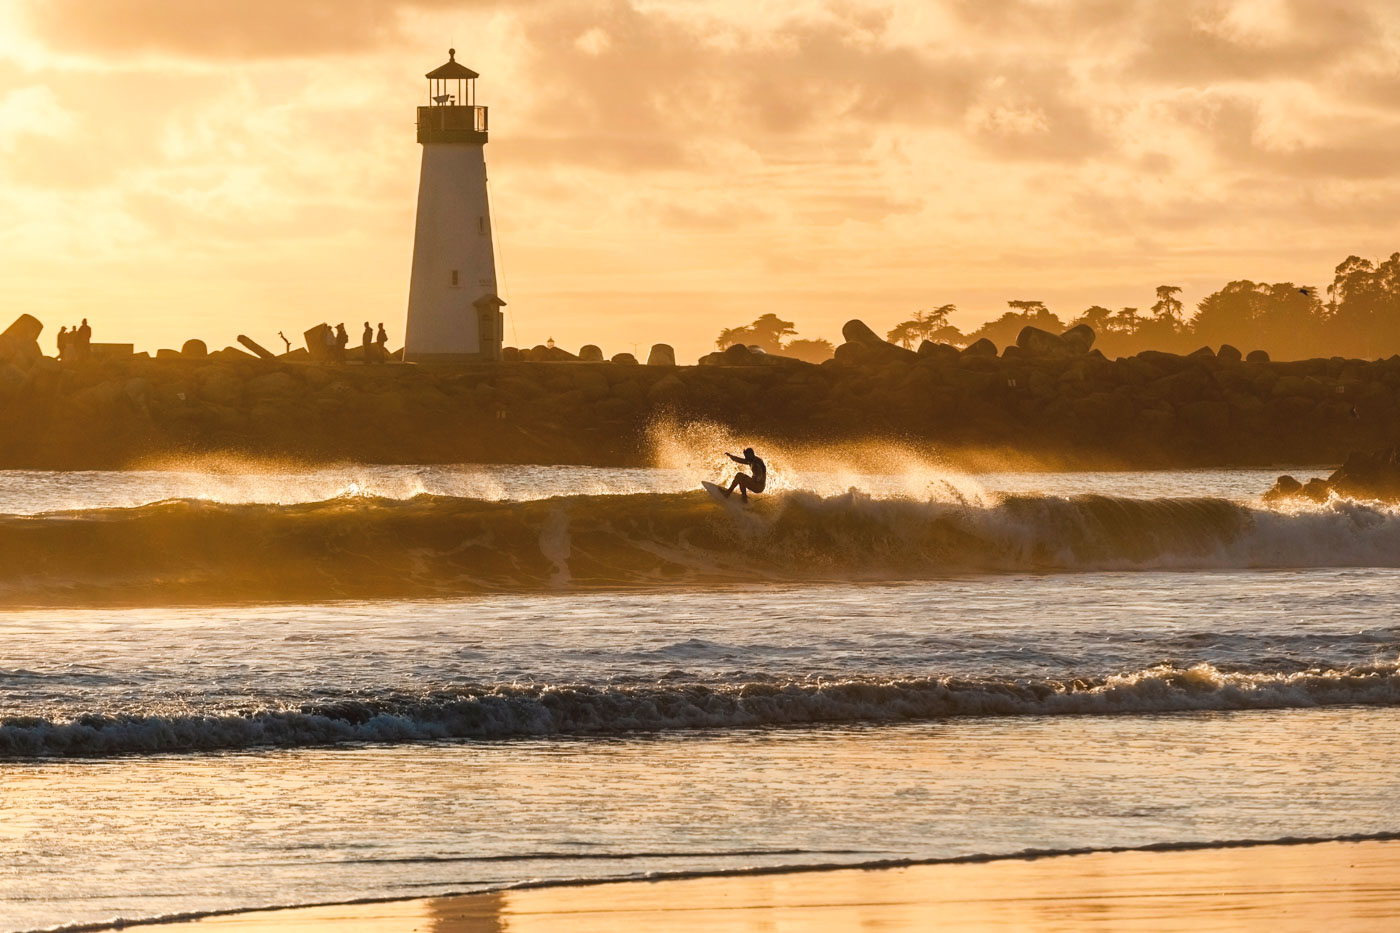 A surfer carving a wave in a golden hour glow with a backdrop of a lighthouse at Seabright Beach.